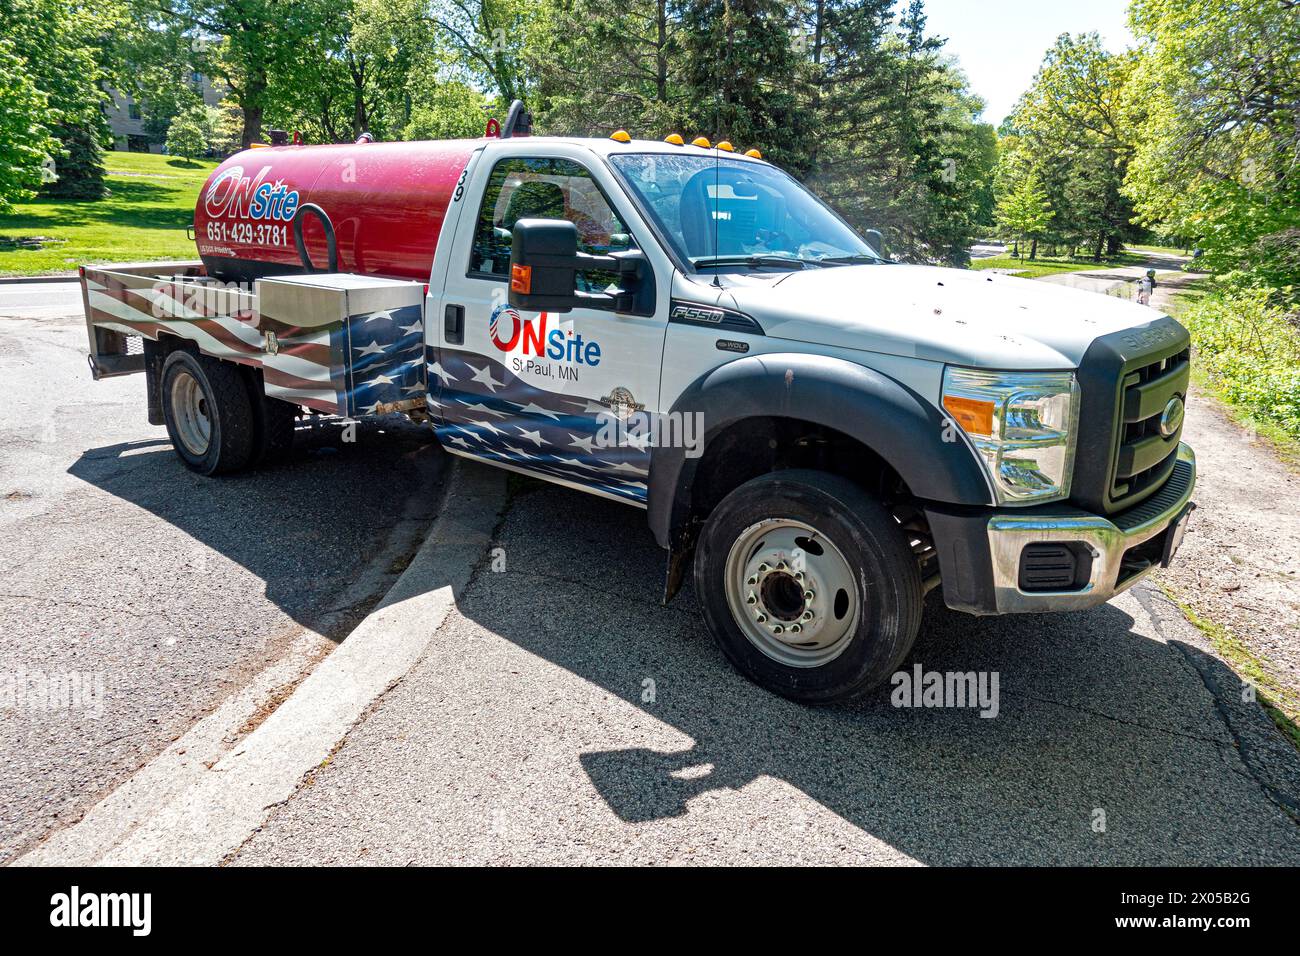 Onsite pump truck for emptying portable outhouses for walkers runners bikers on the North Mississippi River Boulevard. St Paul Minnesota MN USA Stock Photo